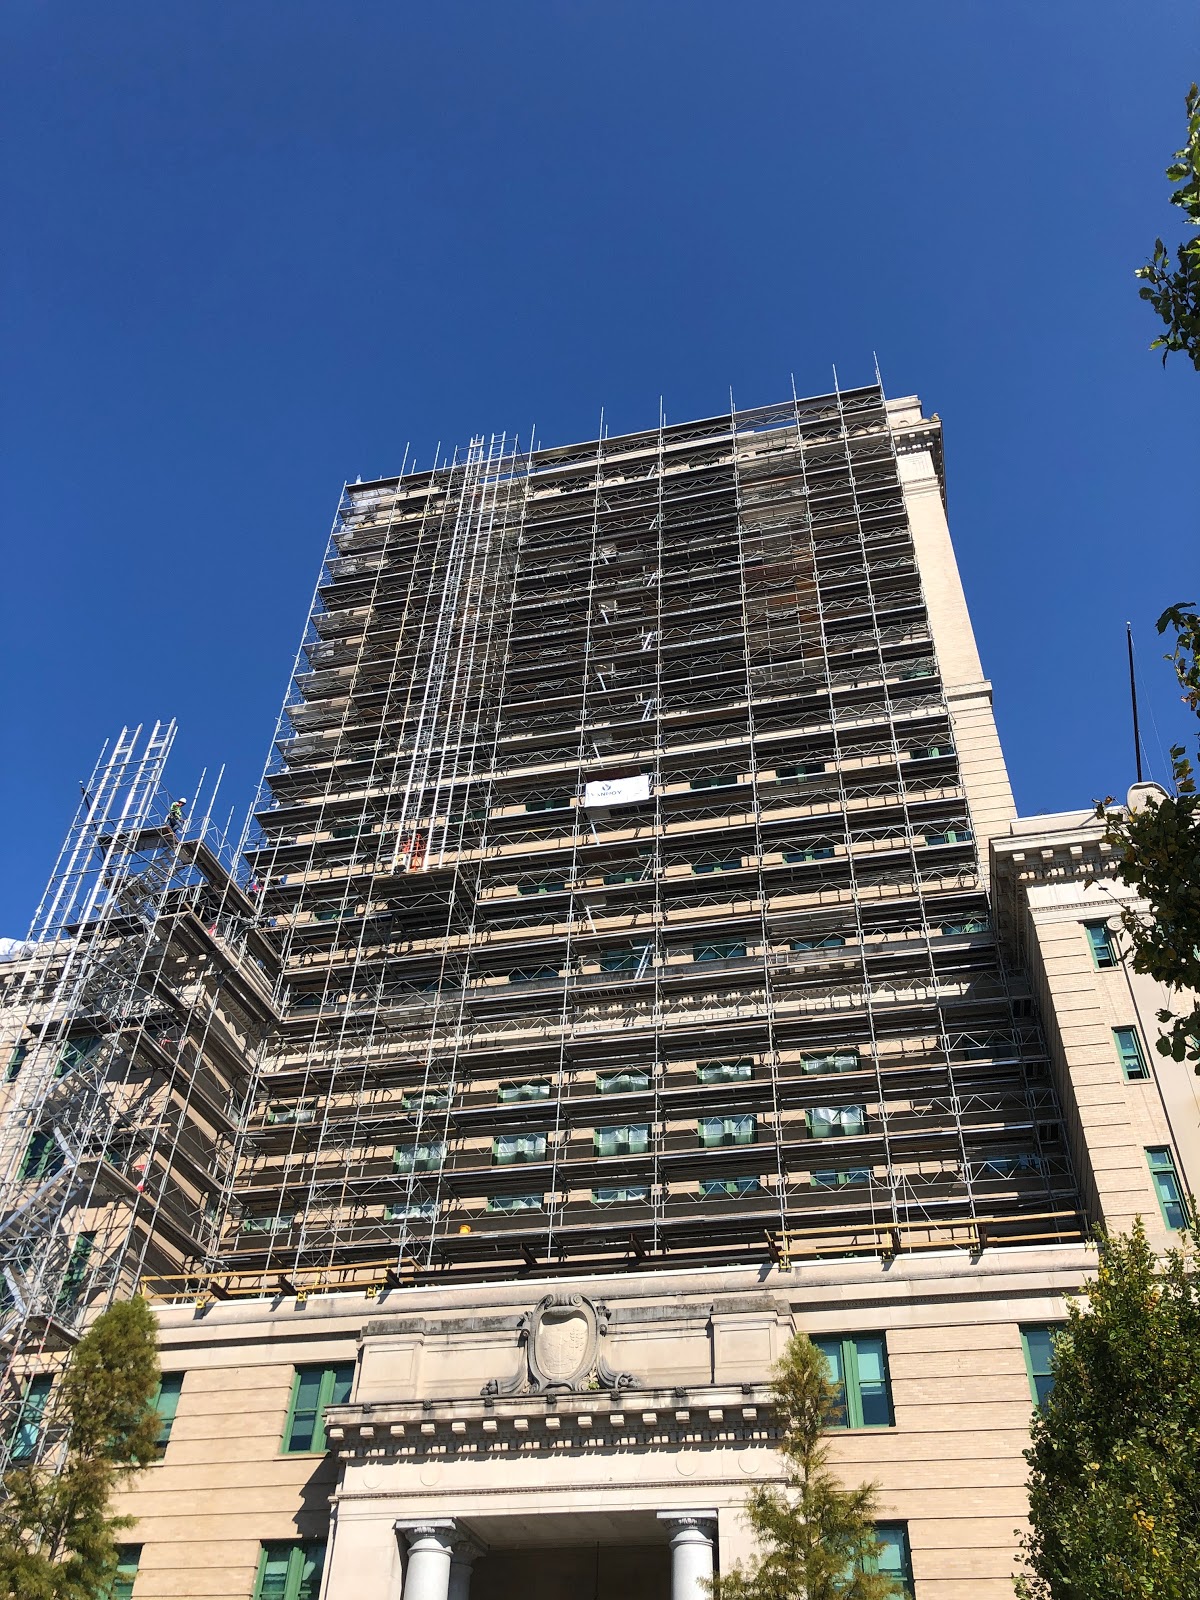 system scaffolding for a project on a historic courthouse